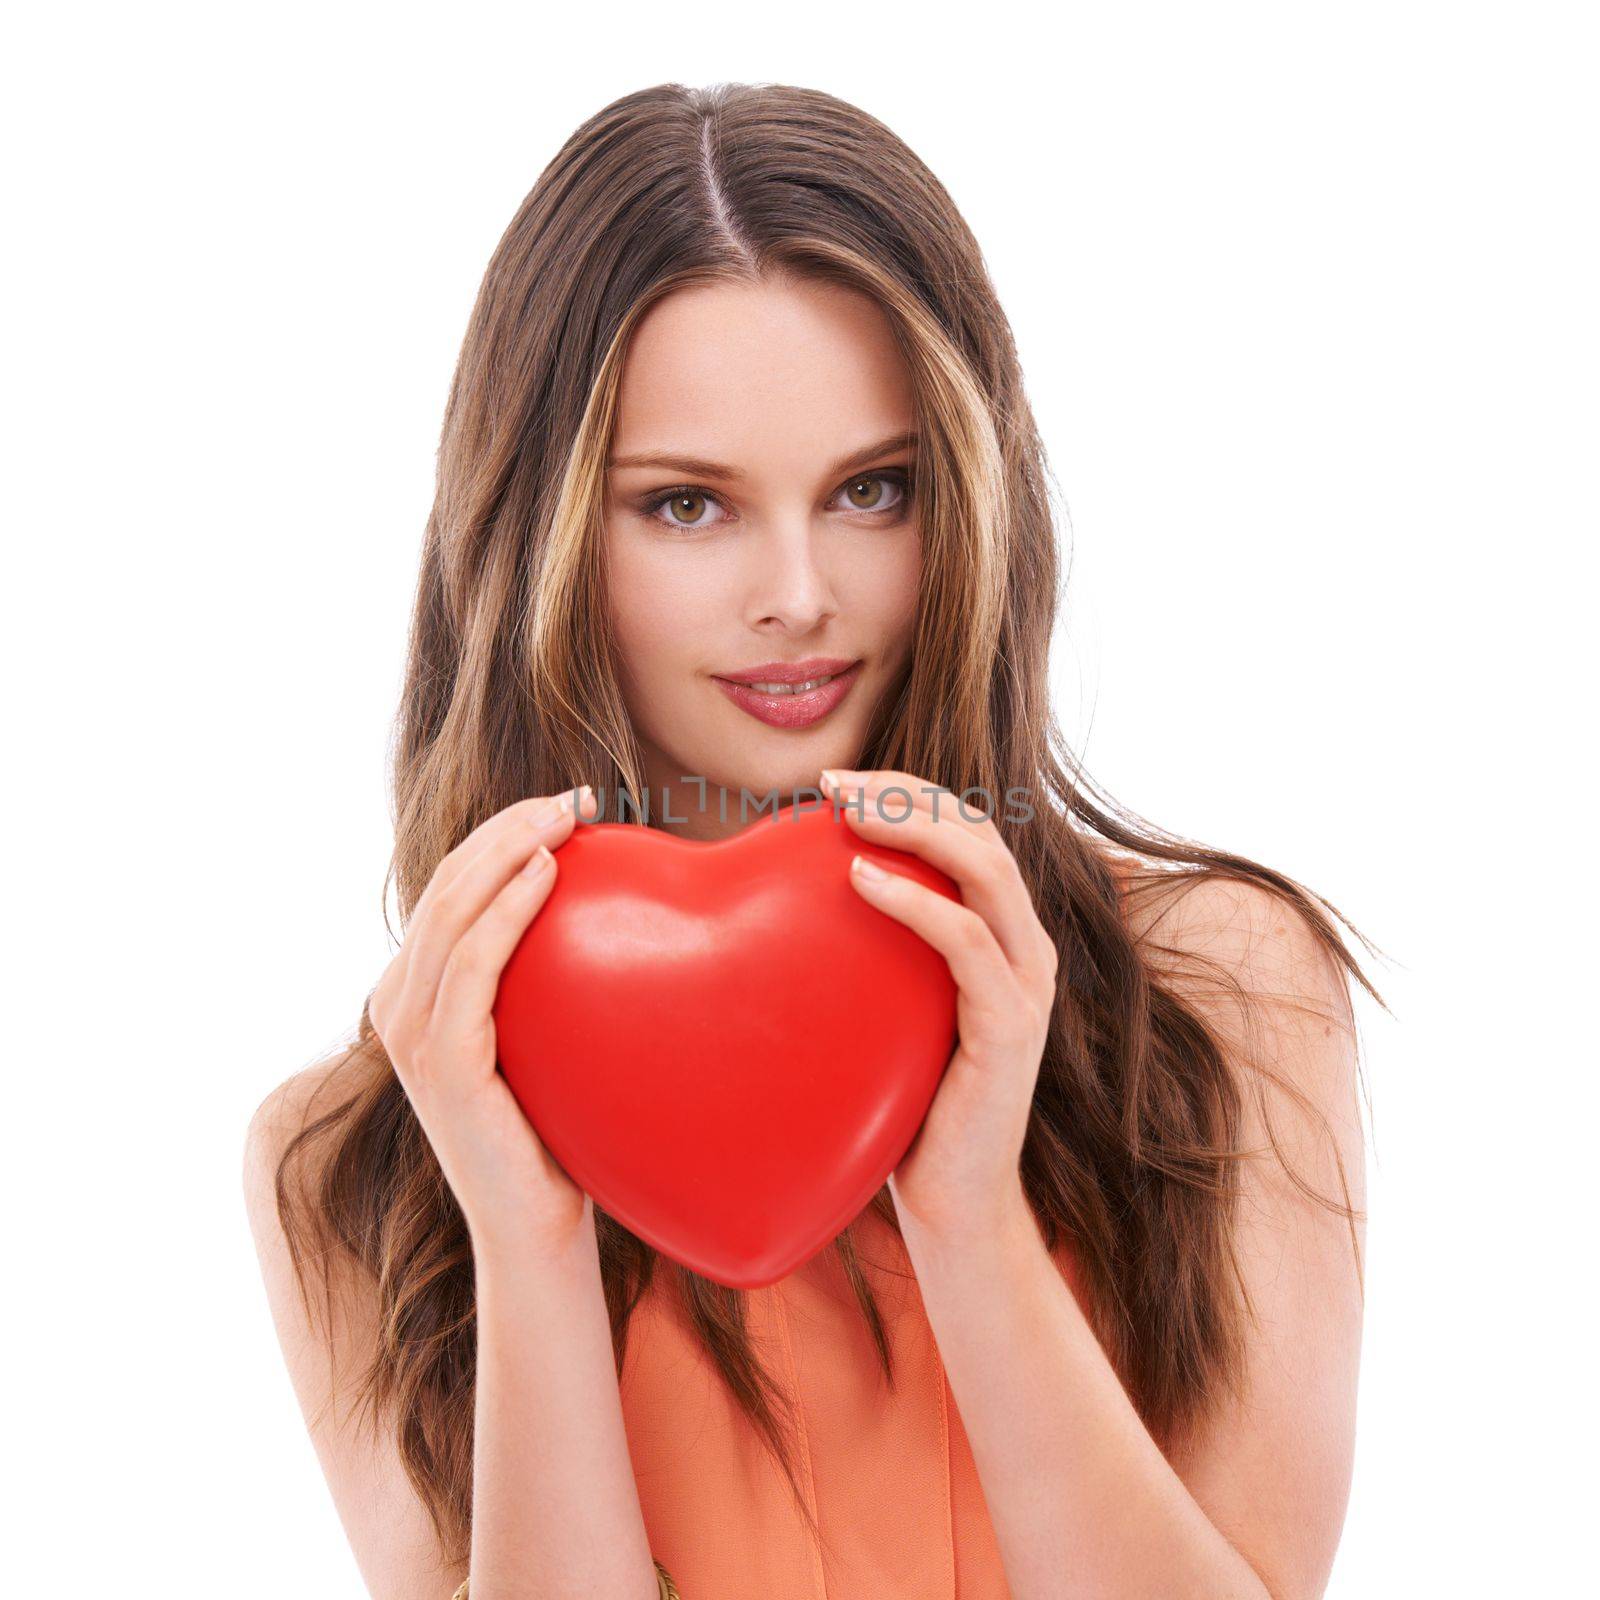 Face portrait, heart balloon and woman in studio isolated on white background. Love, affection and young female model holding symbol for romance, valentines passion or romantic emoji, care or empathy.